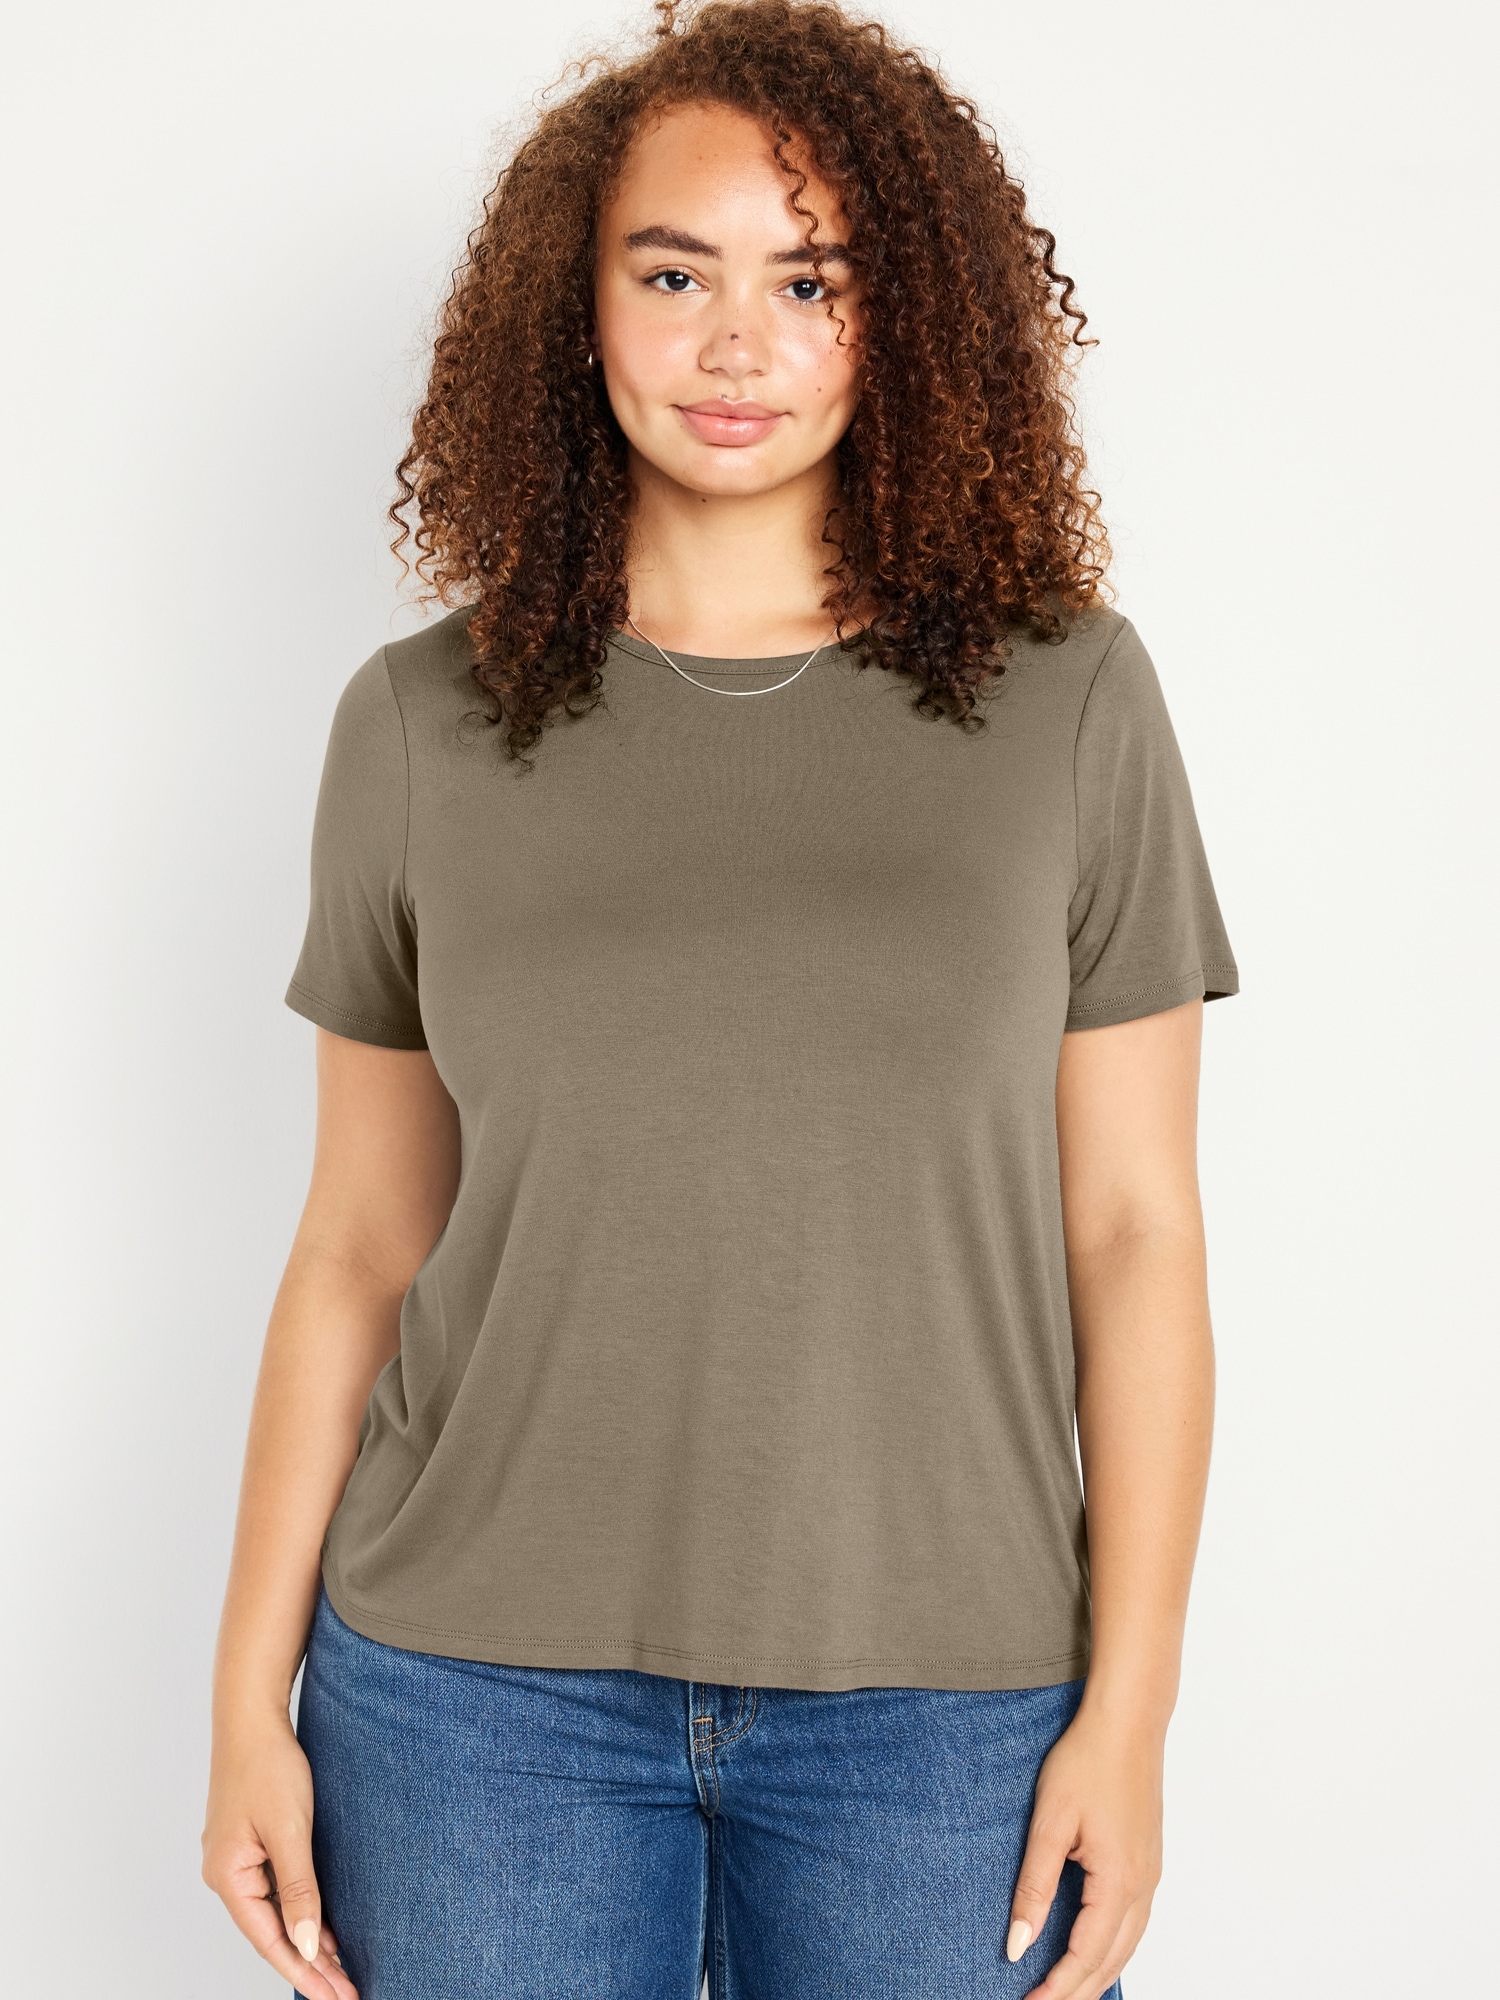 T-Shirt Luxe Women Old | Crew-Neck Navy for